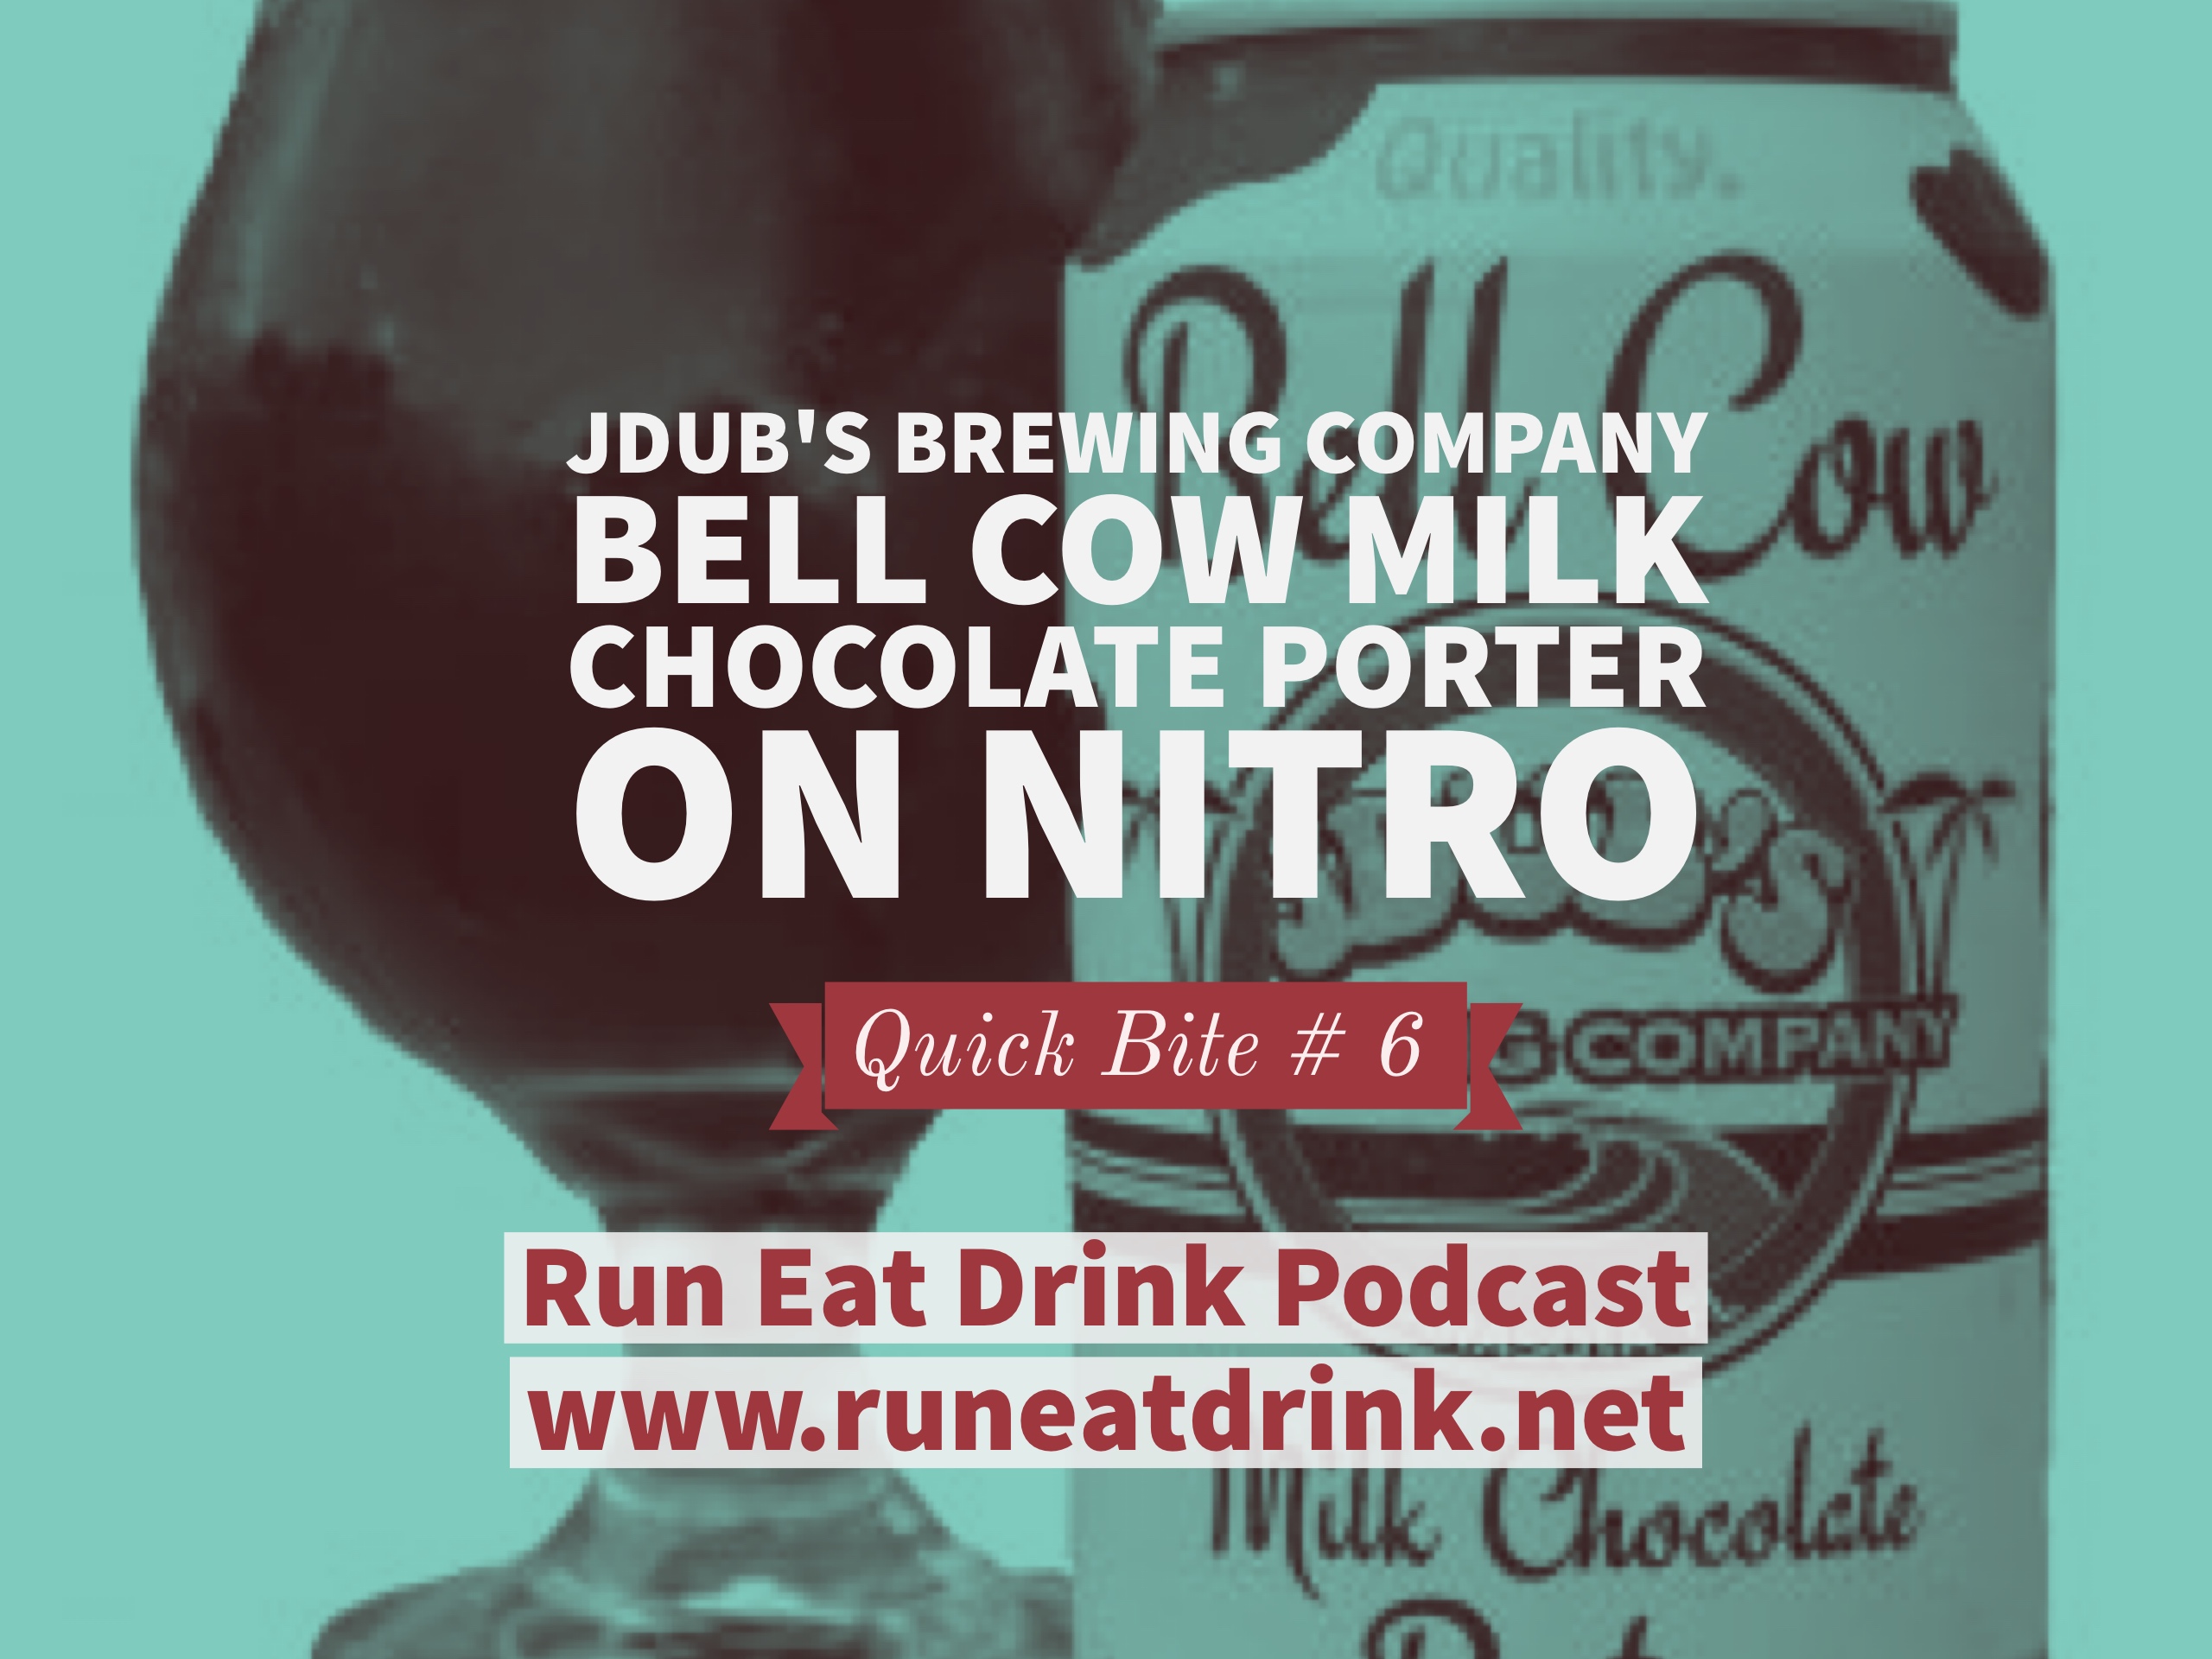 RED Quick Bite #6: JDub's Brewing Company Bell Cow Milk Chocolate Porter on Nitro at Nice Guys Pizza